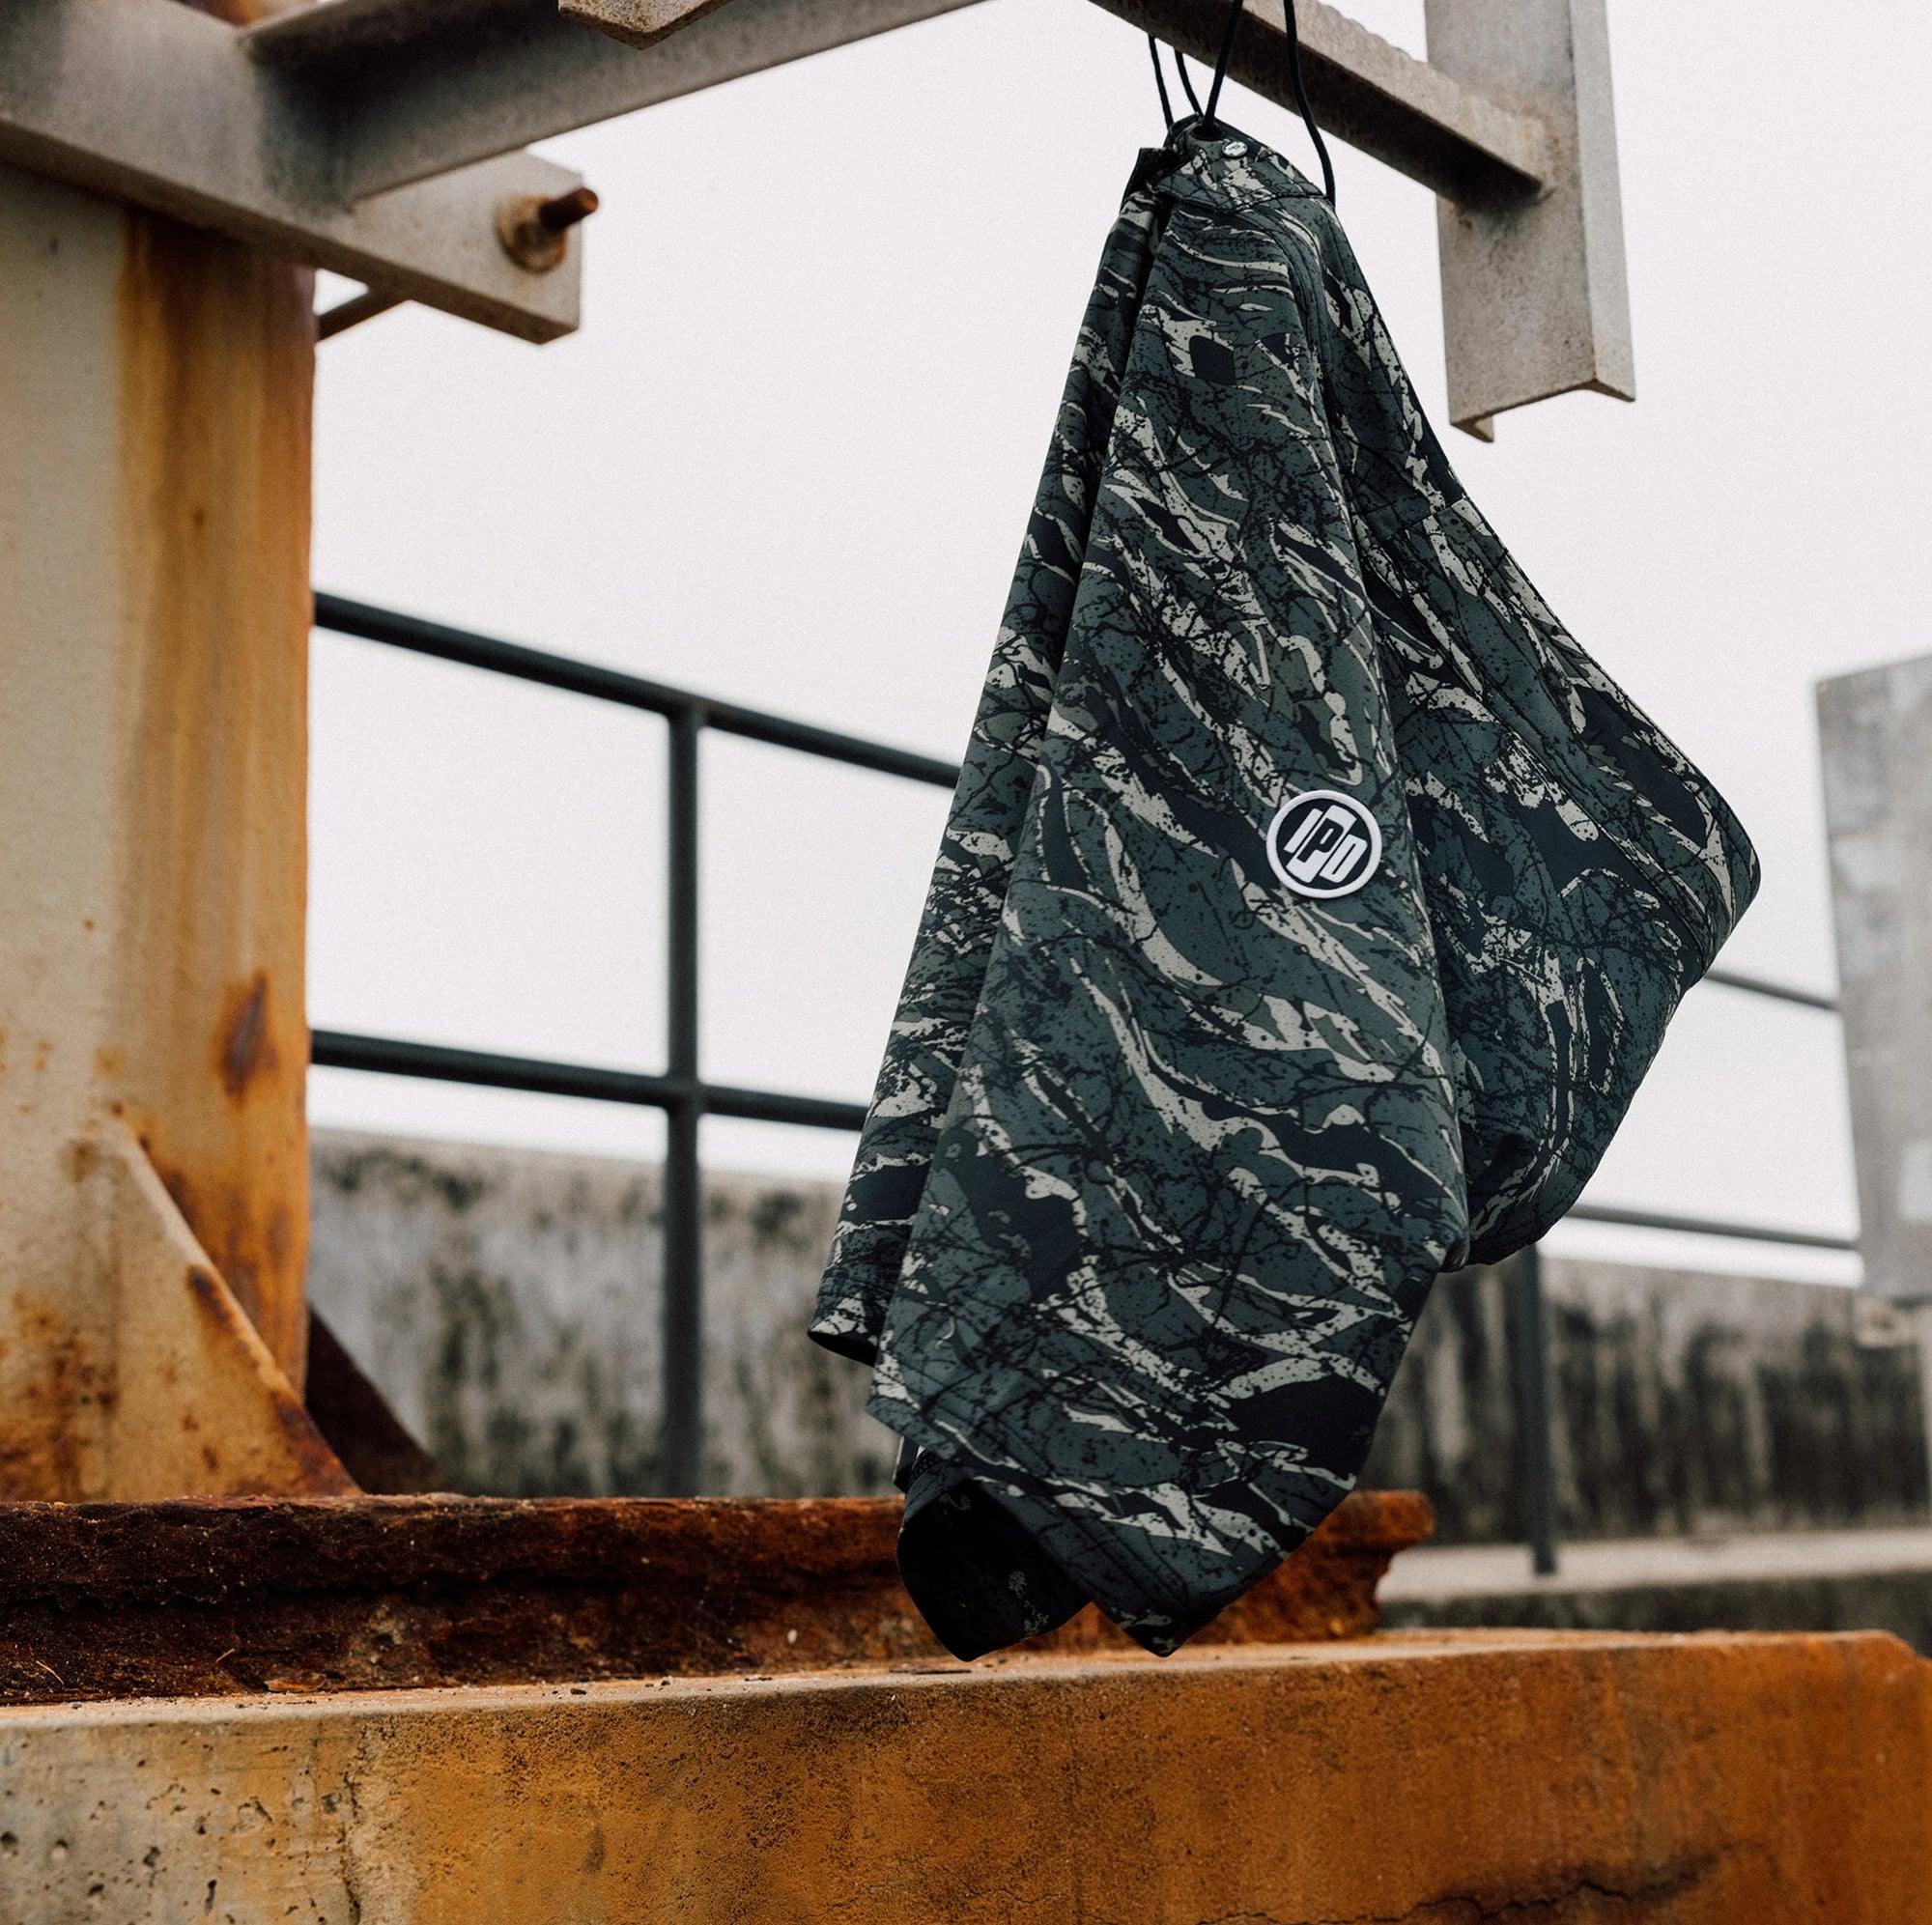 Camouflage board shorts hanging in an industrial setting. Made with 86% recycled polyester and 14% spandex. Features a 20-inch straight hem outseam, zigzag interior stitch waistband, and a signature metal rivet.